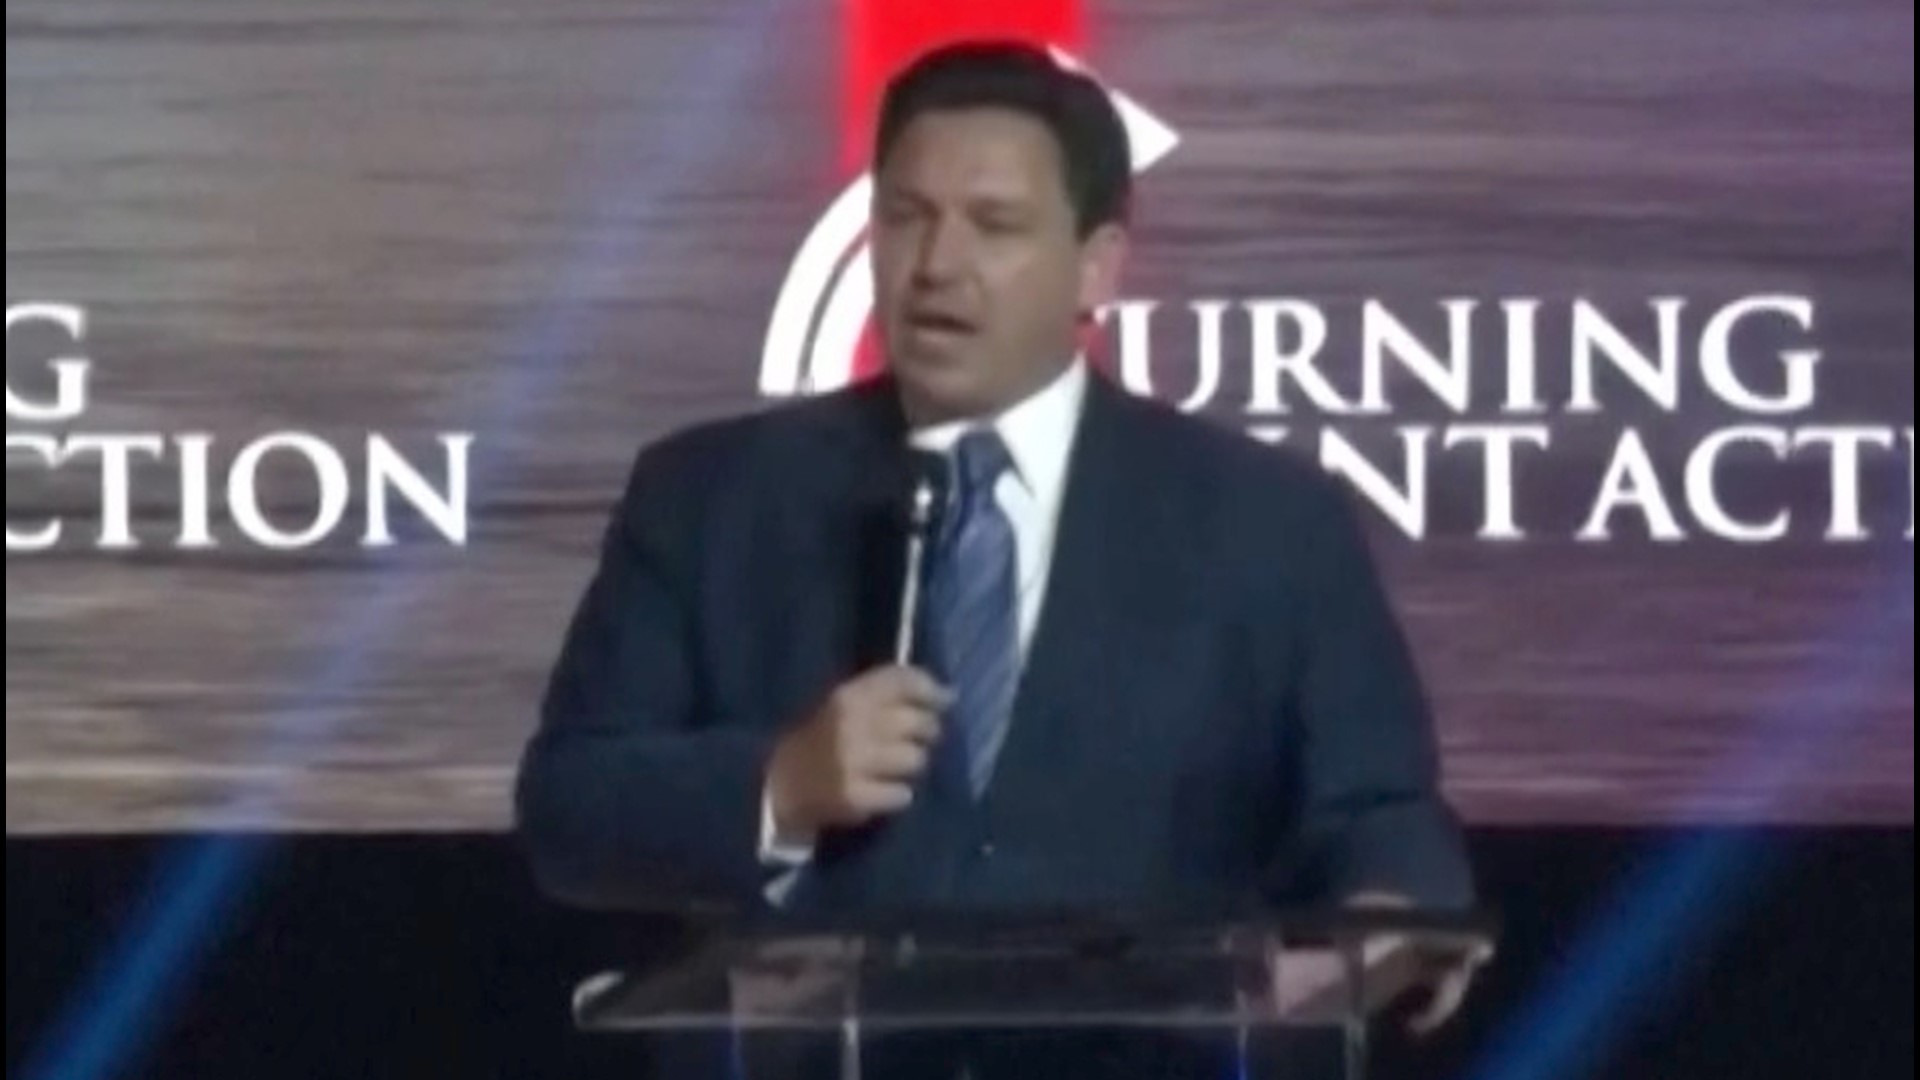 As Trump's favor wanes in his party, DeSantis is coming up. Veuer's Tony Spitz has the details.